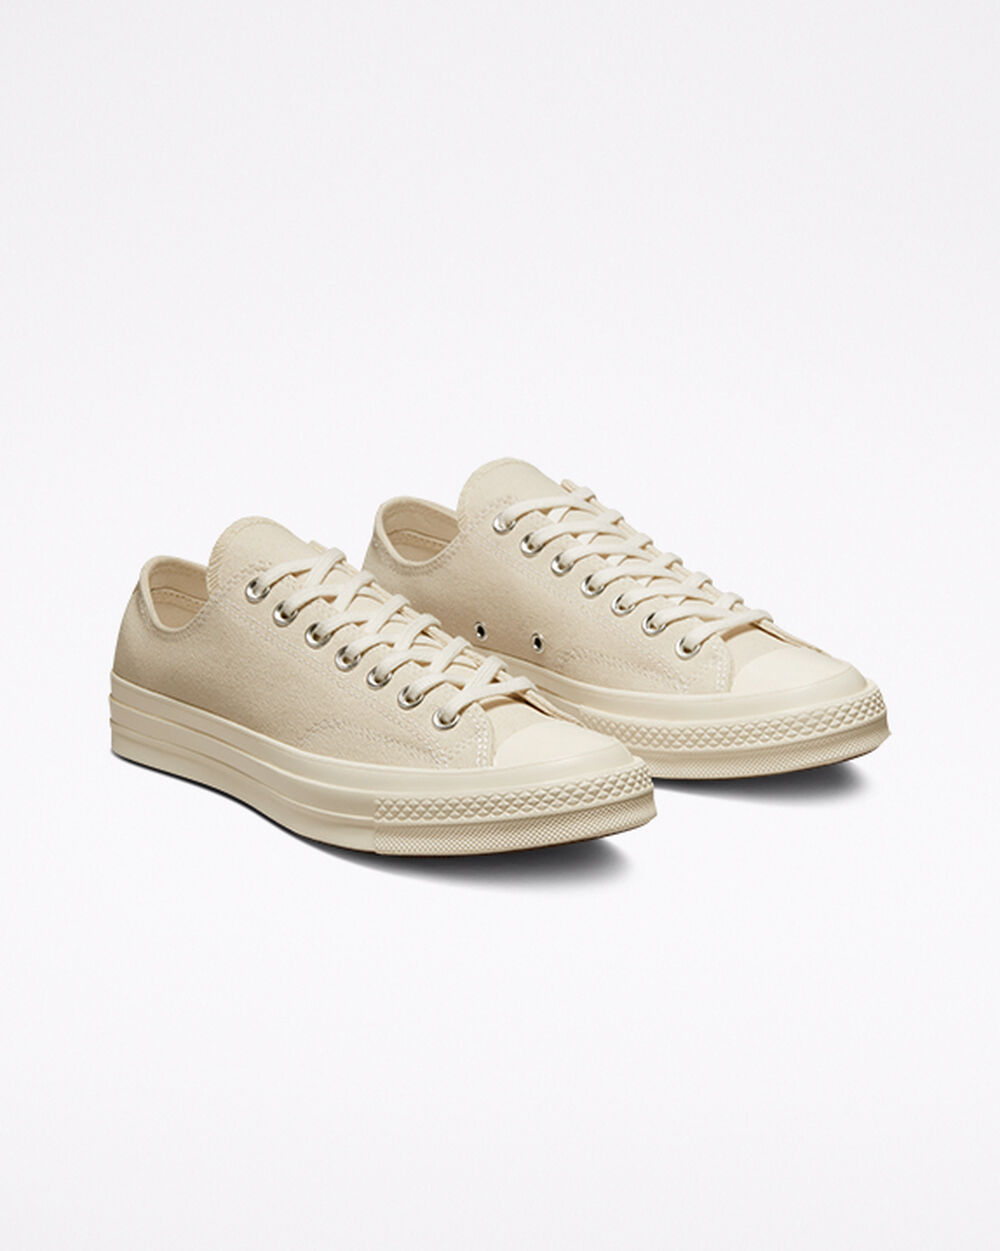 Tenis Converse Chuck 70 Mujer Beige Negros | Mexico-660456